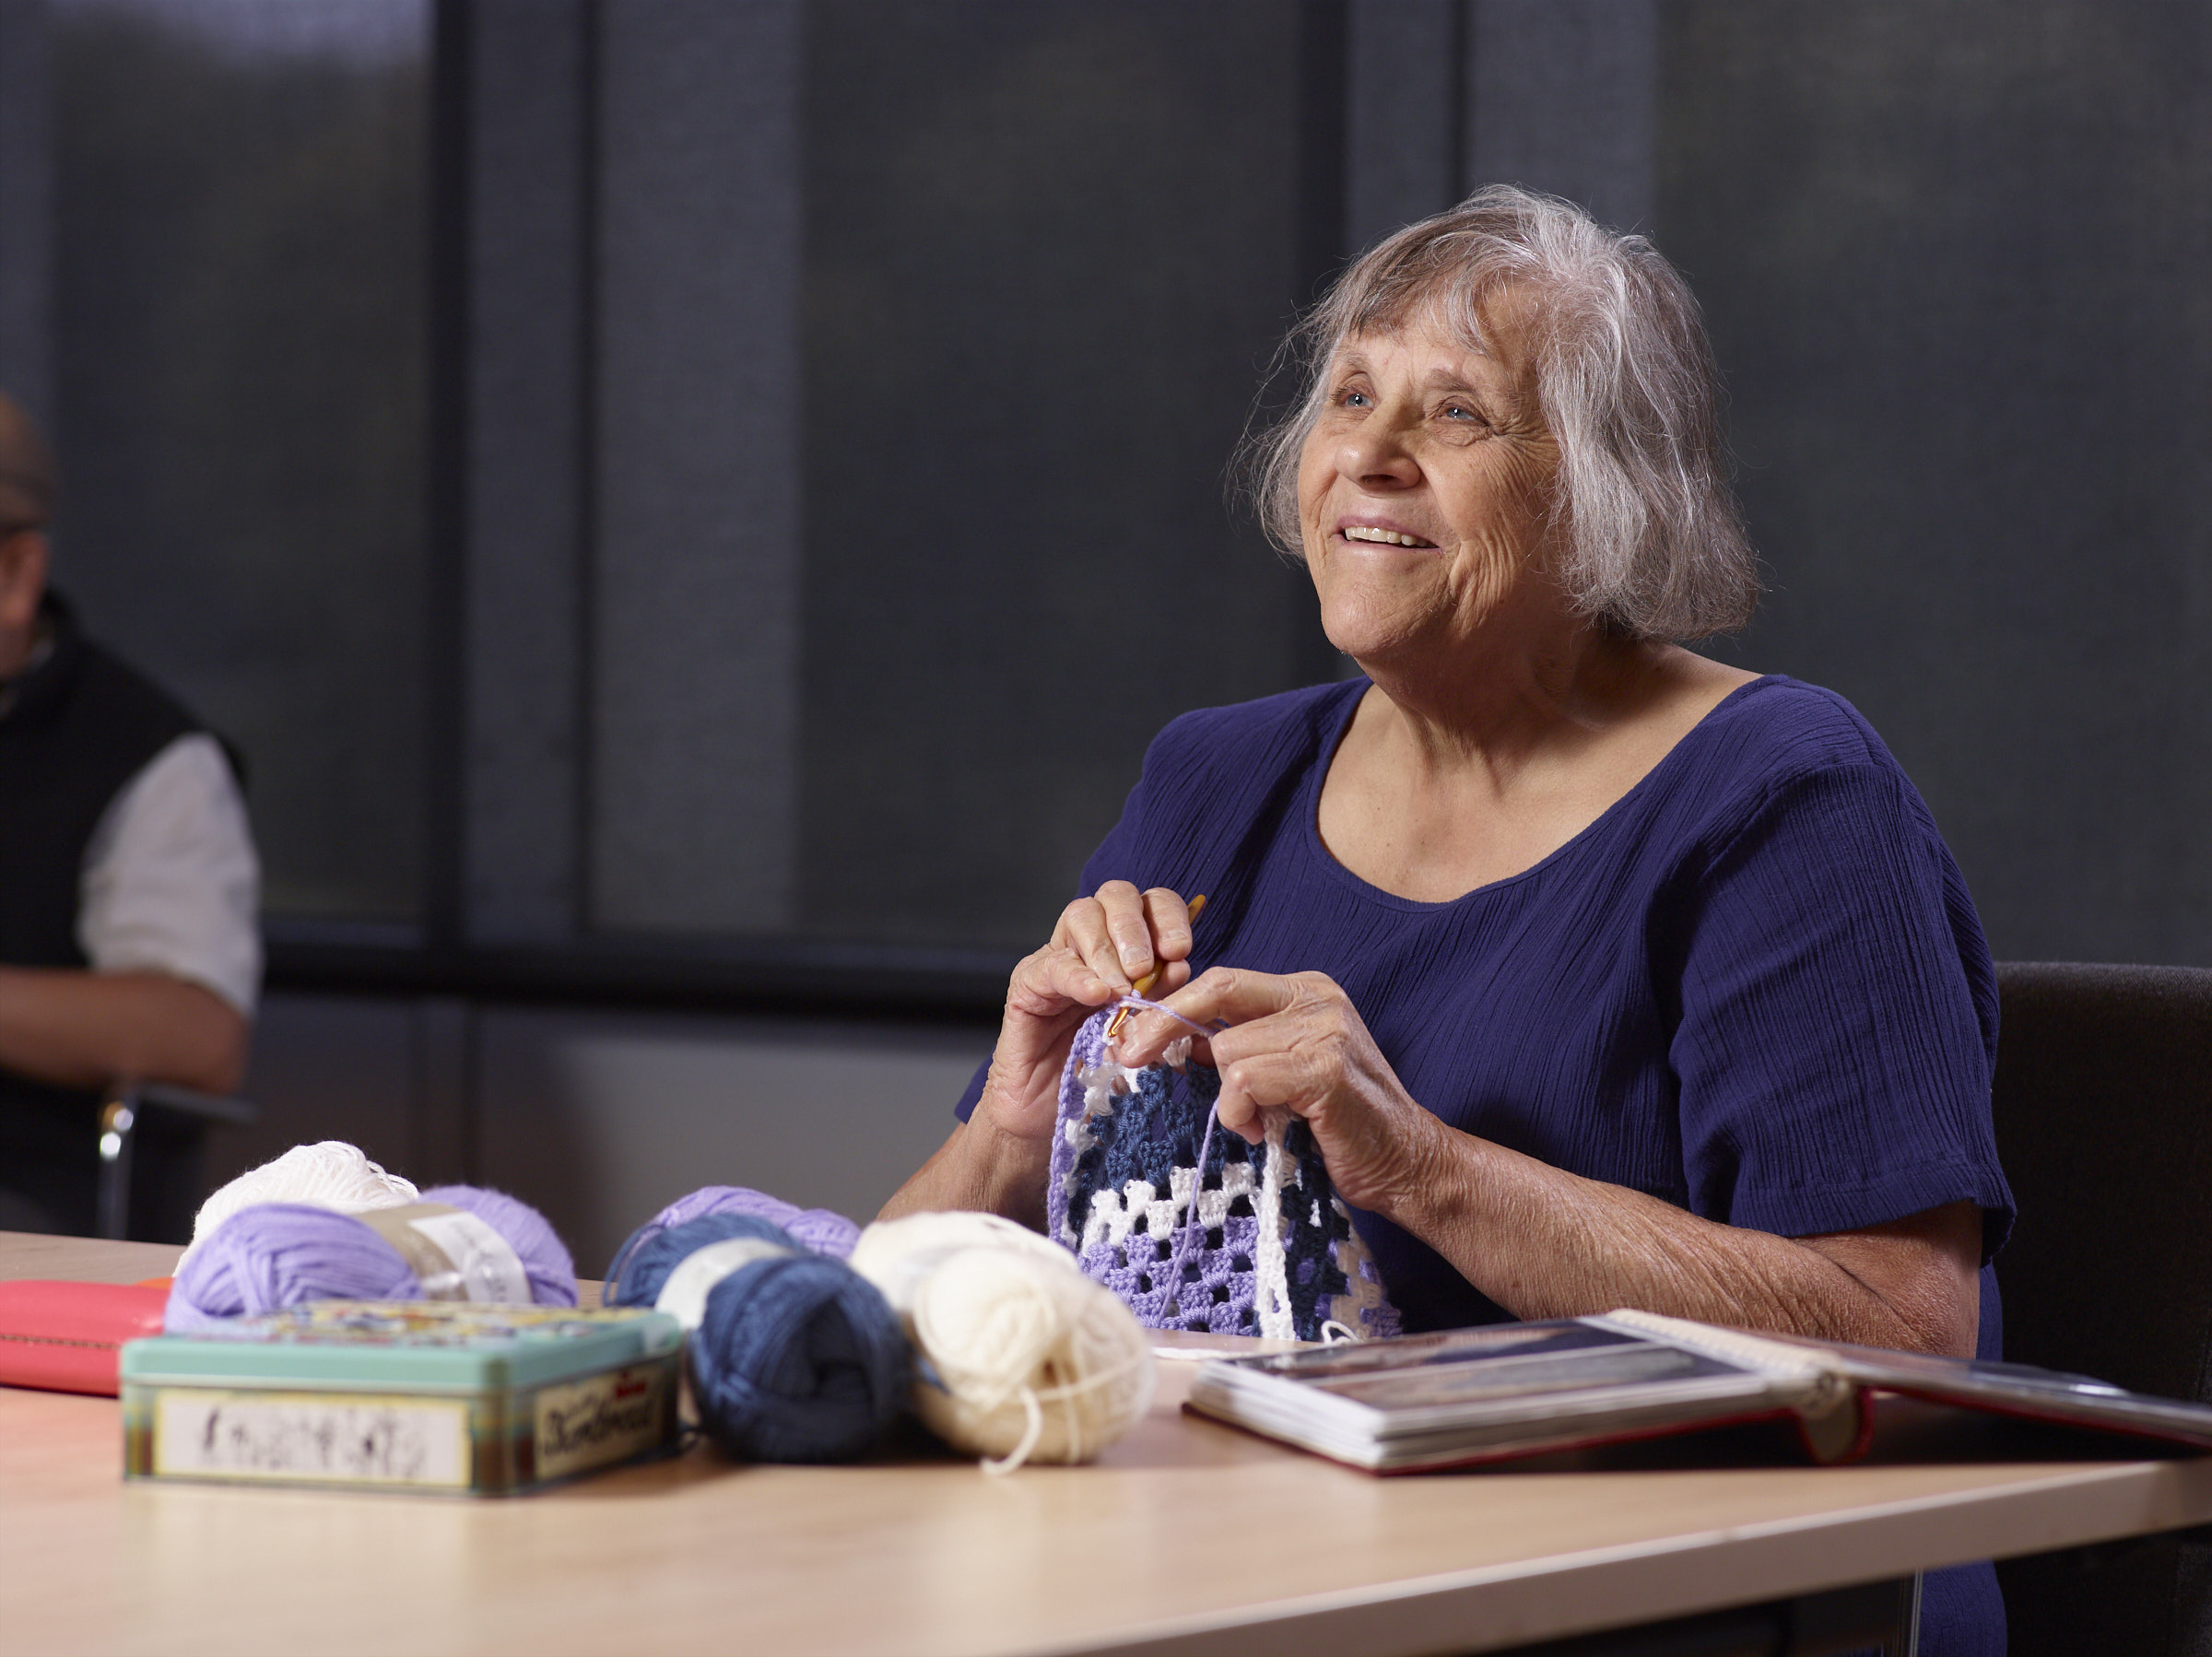 Sarah, an older adult with short grey hair, sits at a table surrounded by thread as she knits